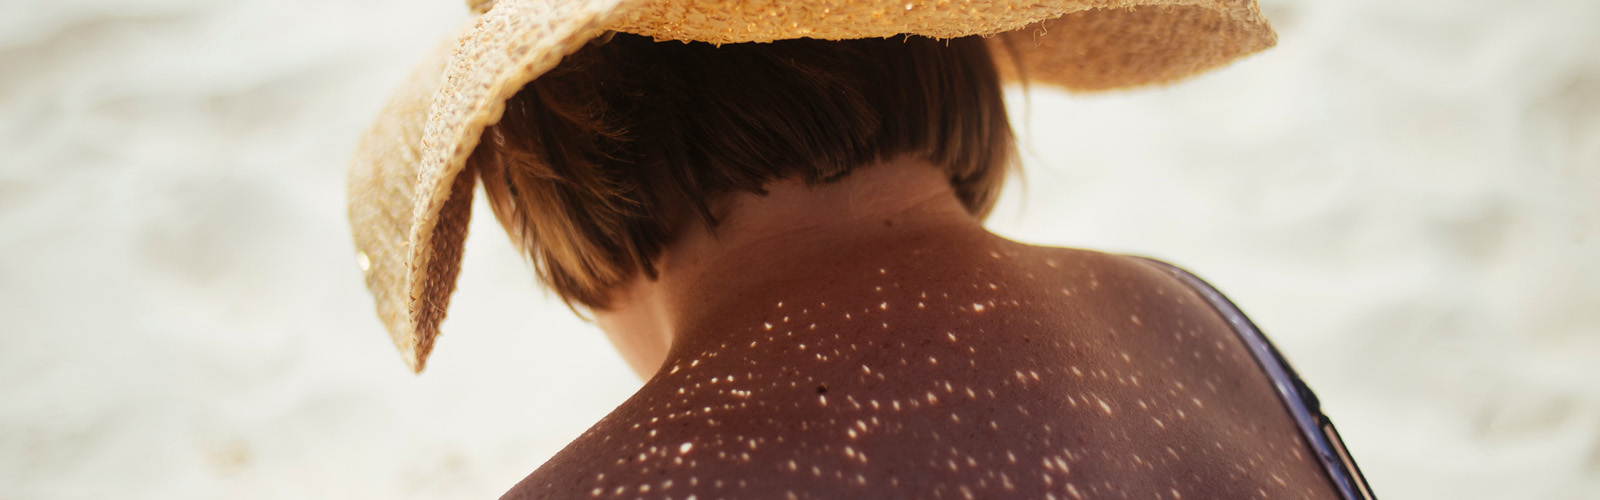 5 surprsing facts about sunscreen